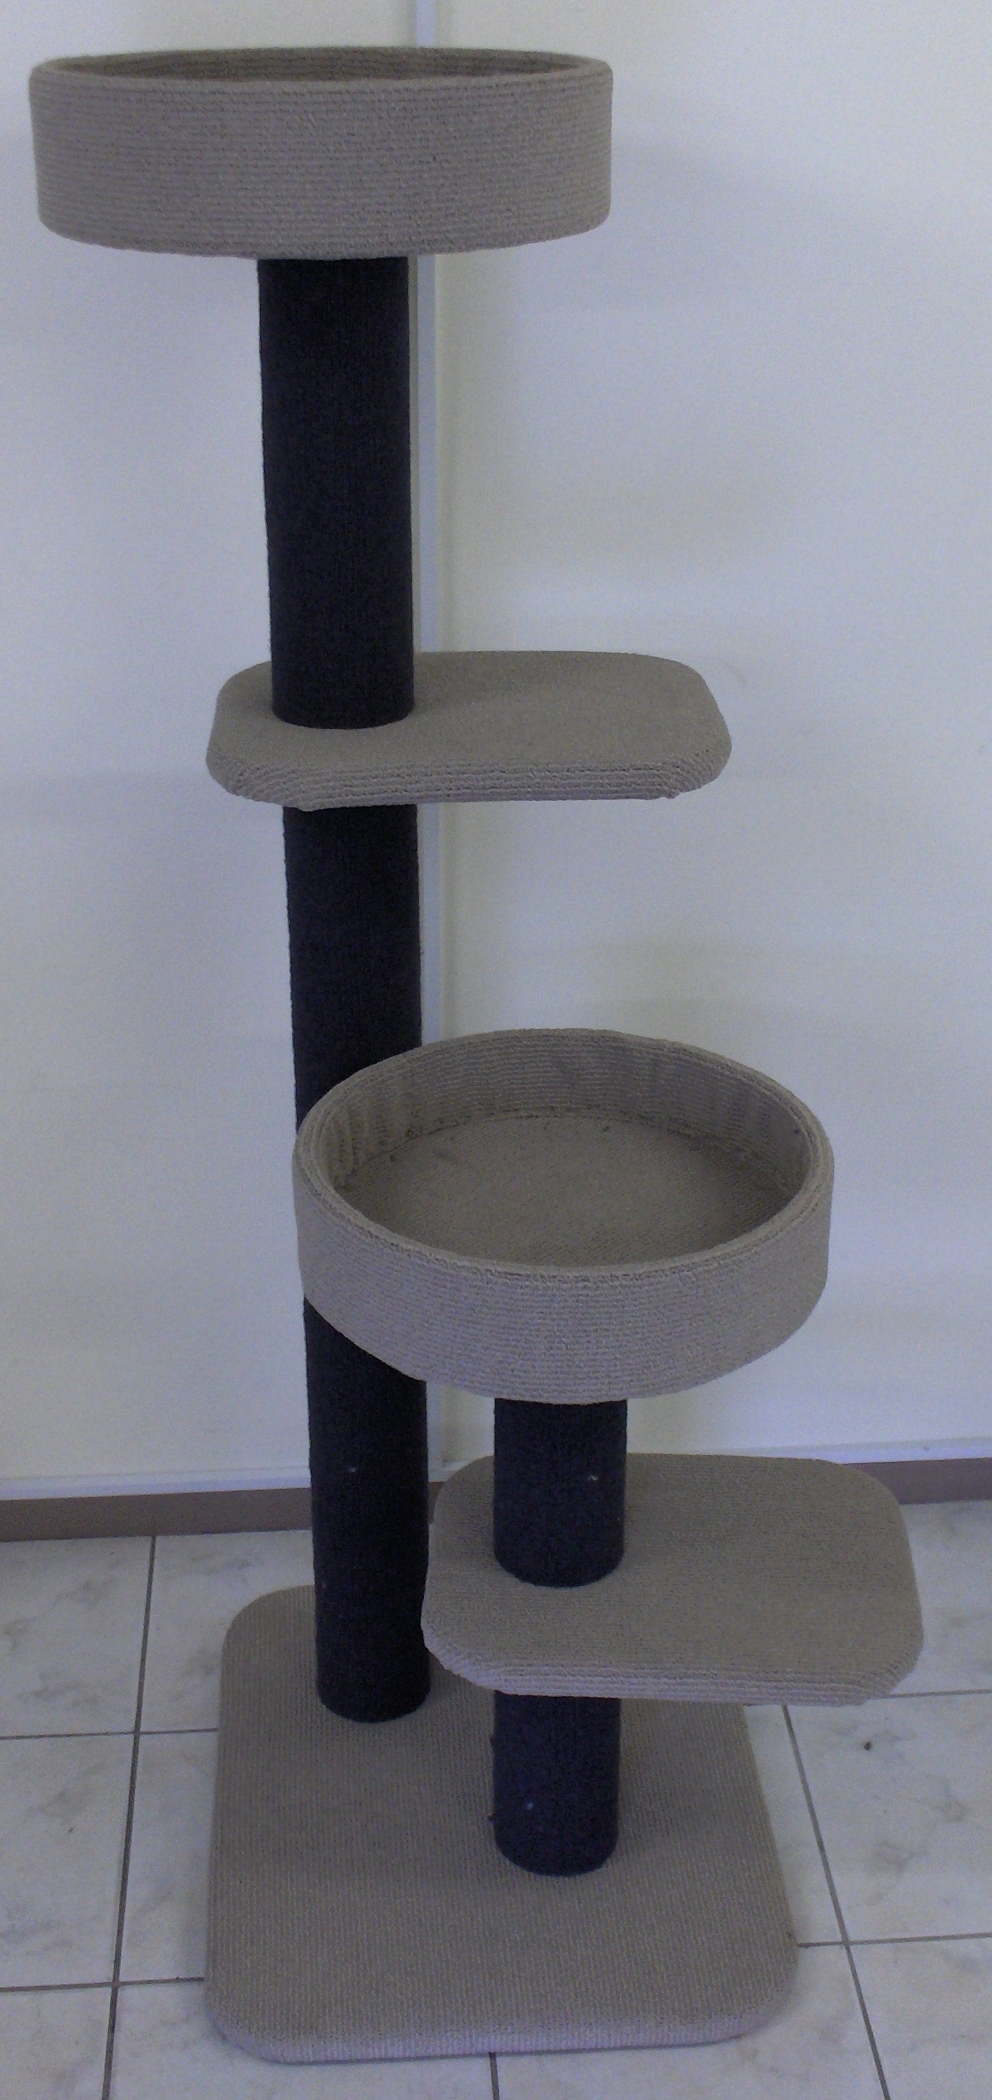 2 POLES WITH PLATFORM AND BASKET B:60x50 H:135